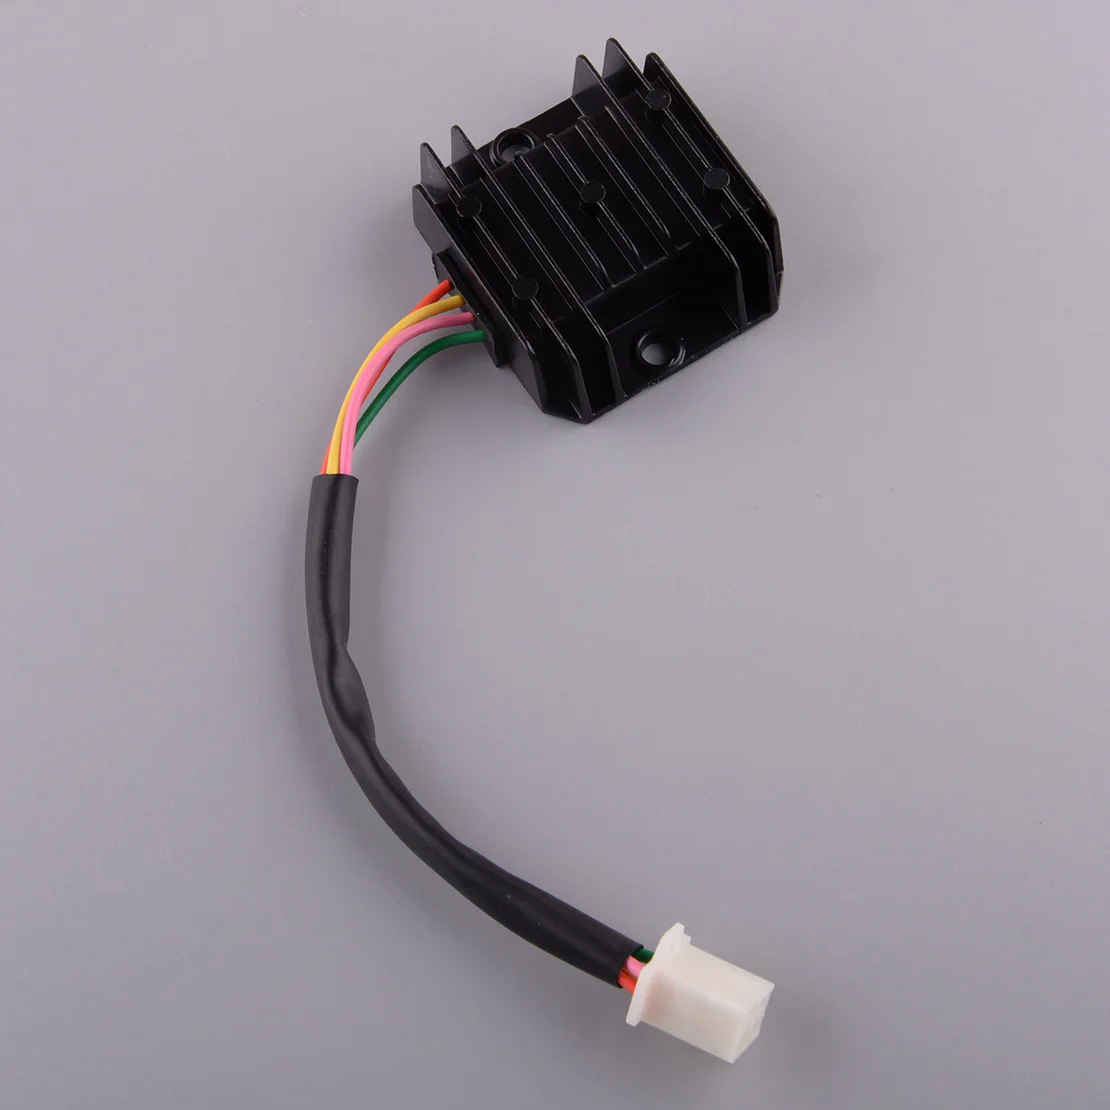 

Motorcycle Motocross Voltage Regulator Rectifier Fit For GY6 125cc 150cc Scooter Moped ATV Quad 110cc 140cc 160cc Dirt Pit Bike